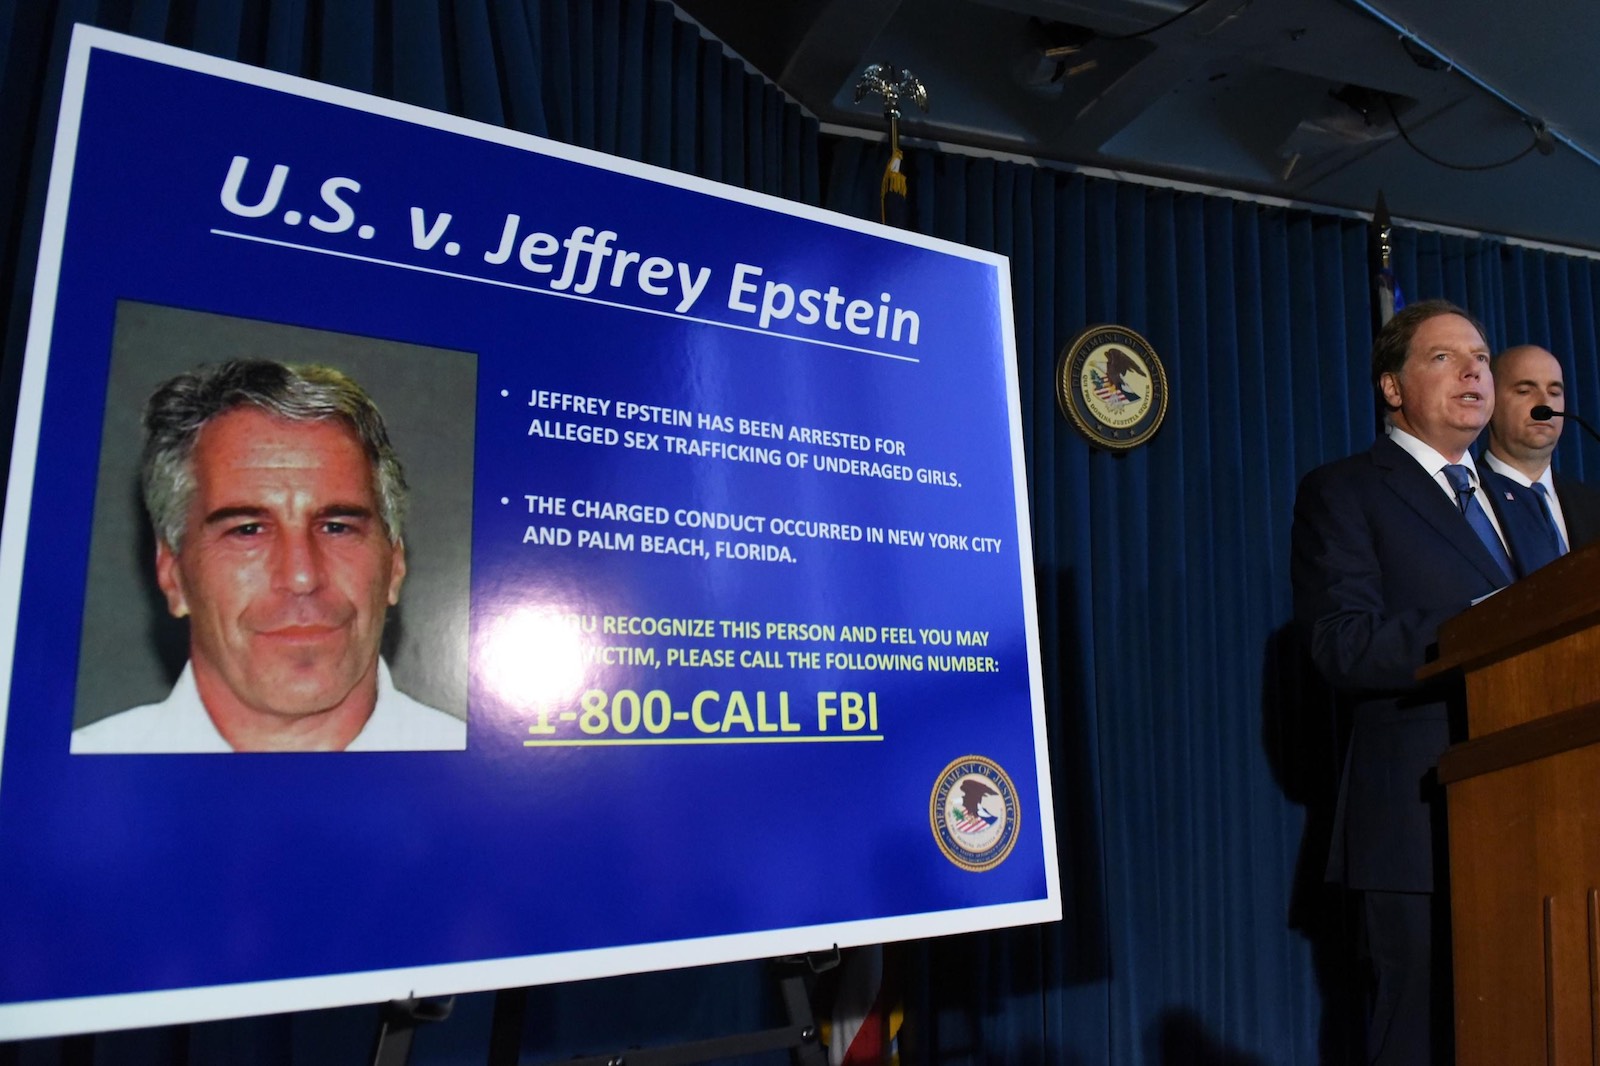 After the mogul died in 2019, the question remained: Who was in control of Jeffrey Epstein's giant fortune? The net worth is a big part of Epstein's case.